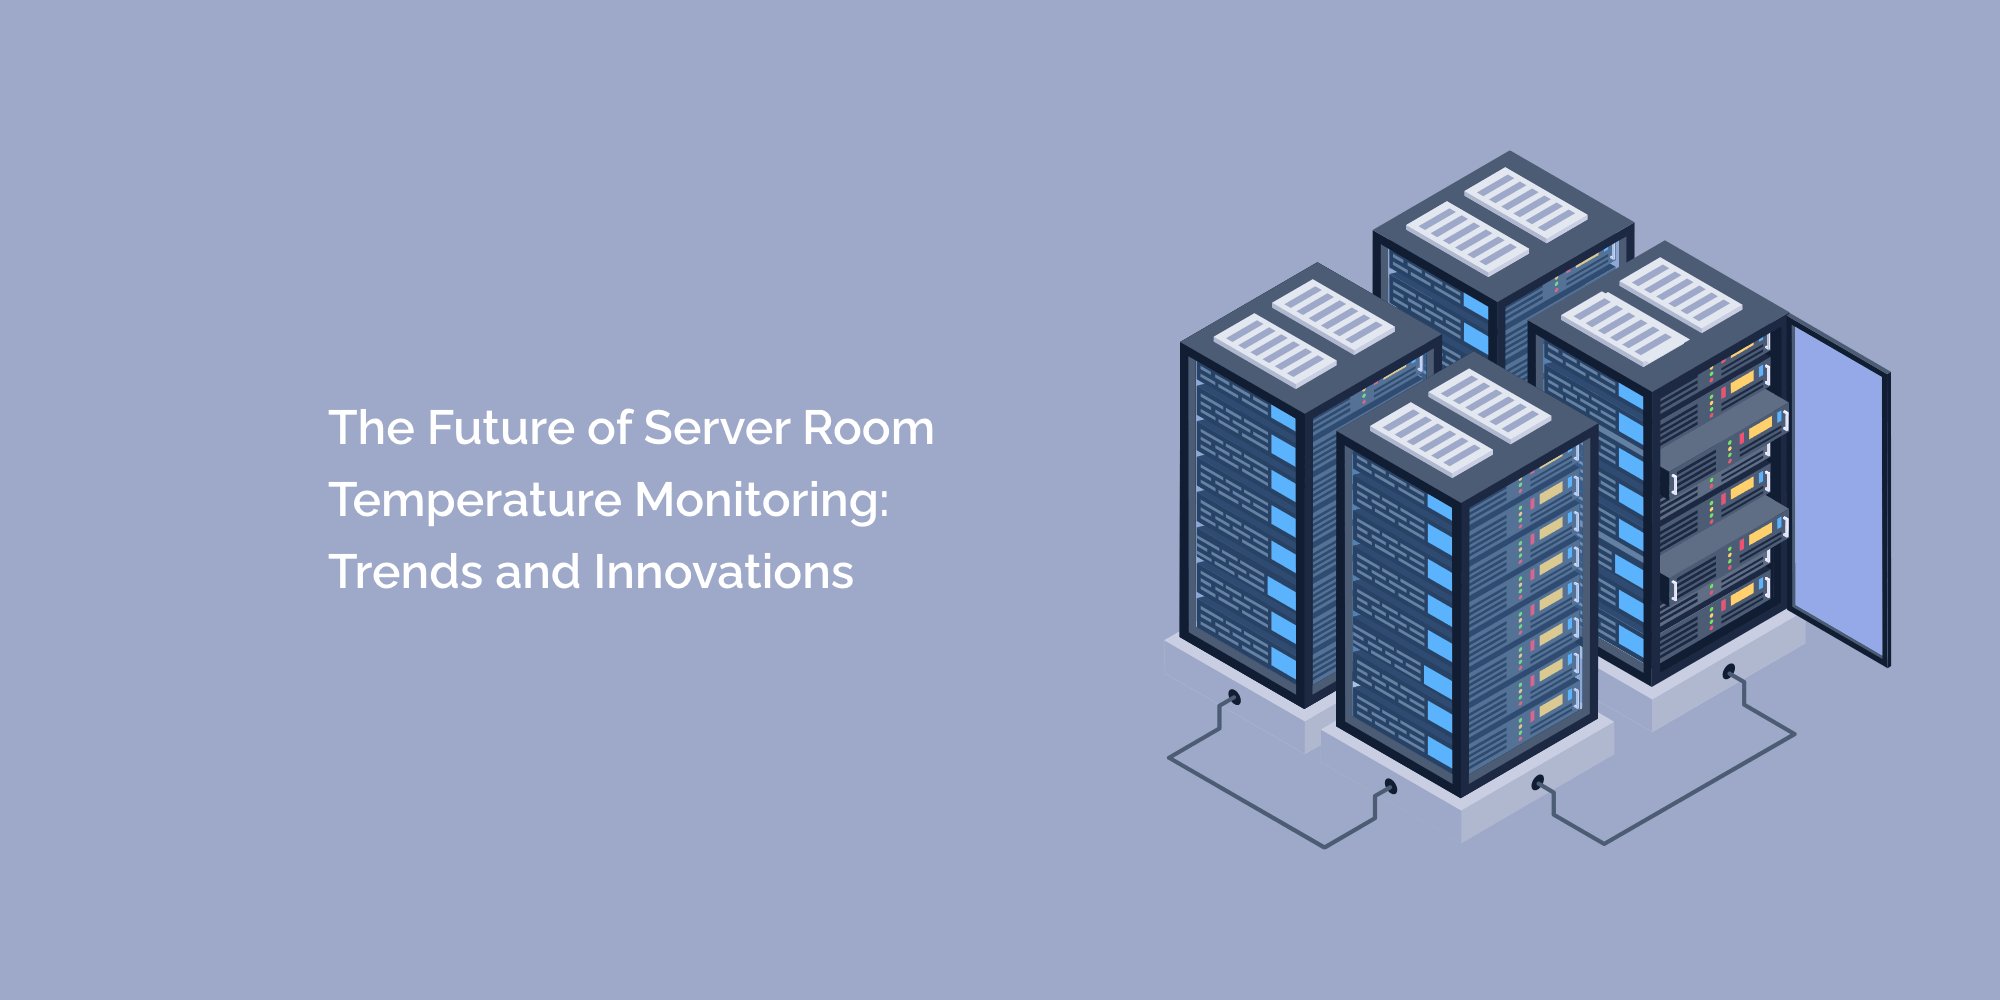 The Future of Server Room Temperature Monitoring: Trends and Innovations